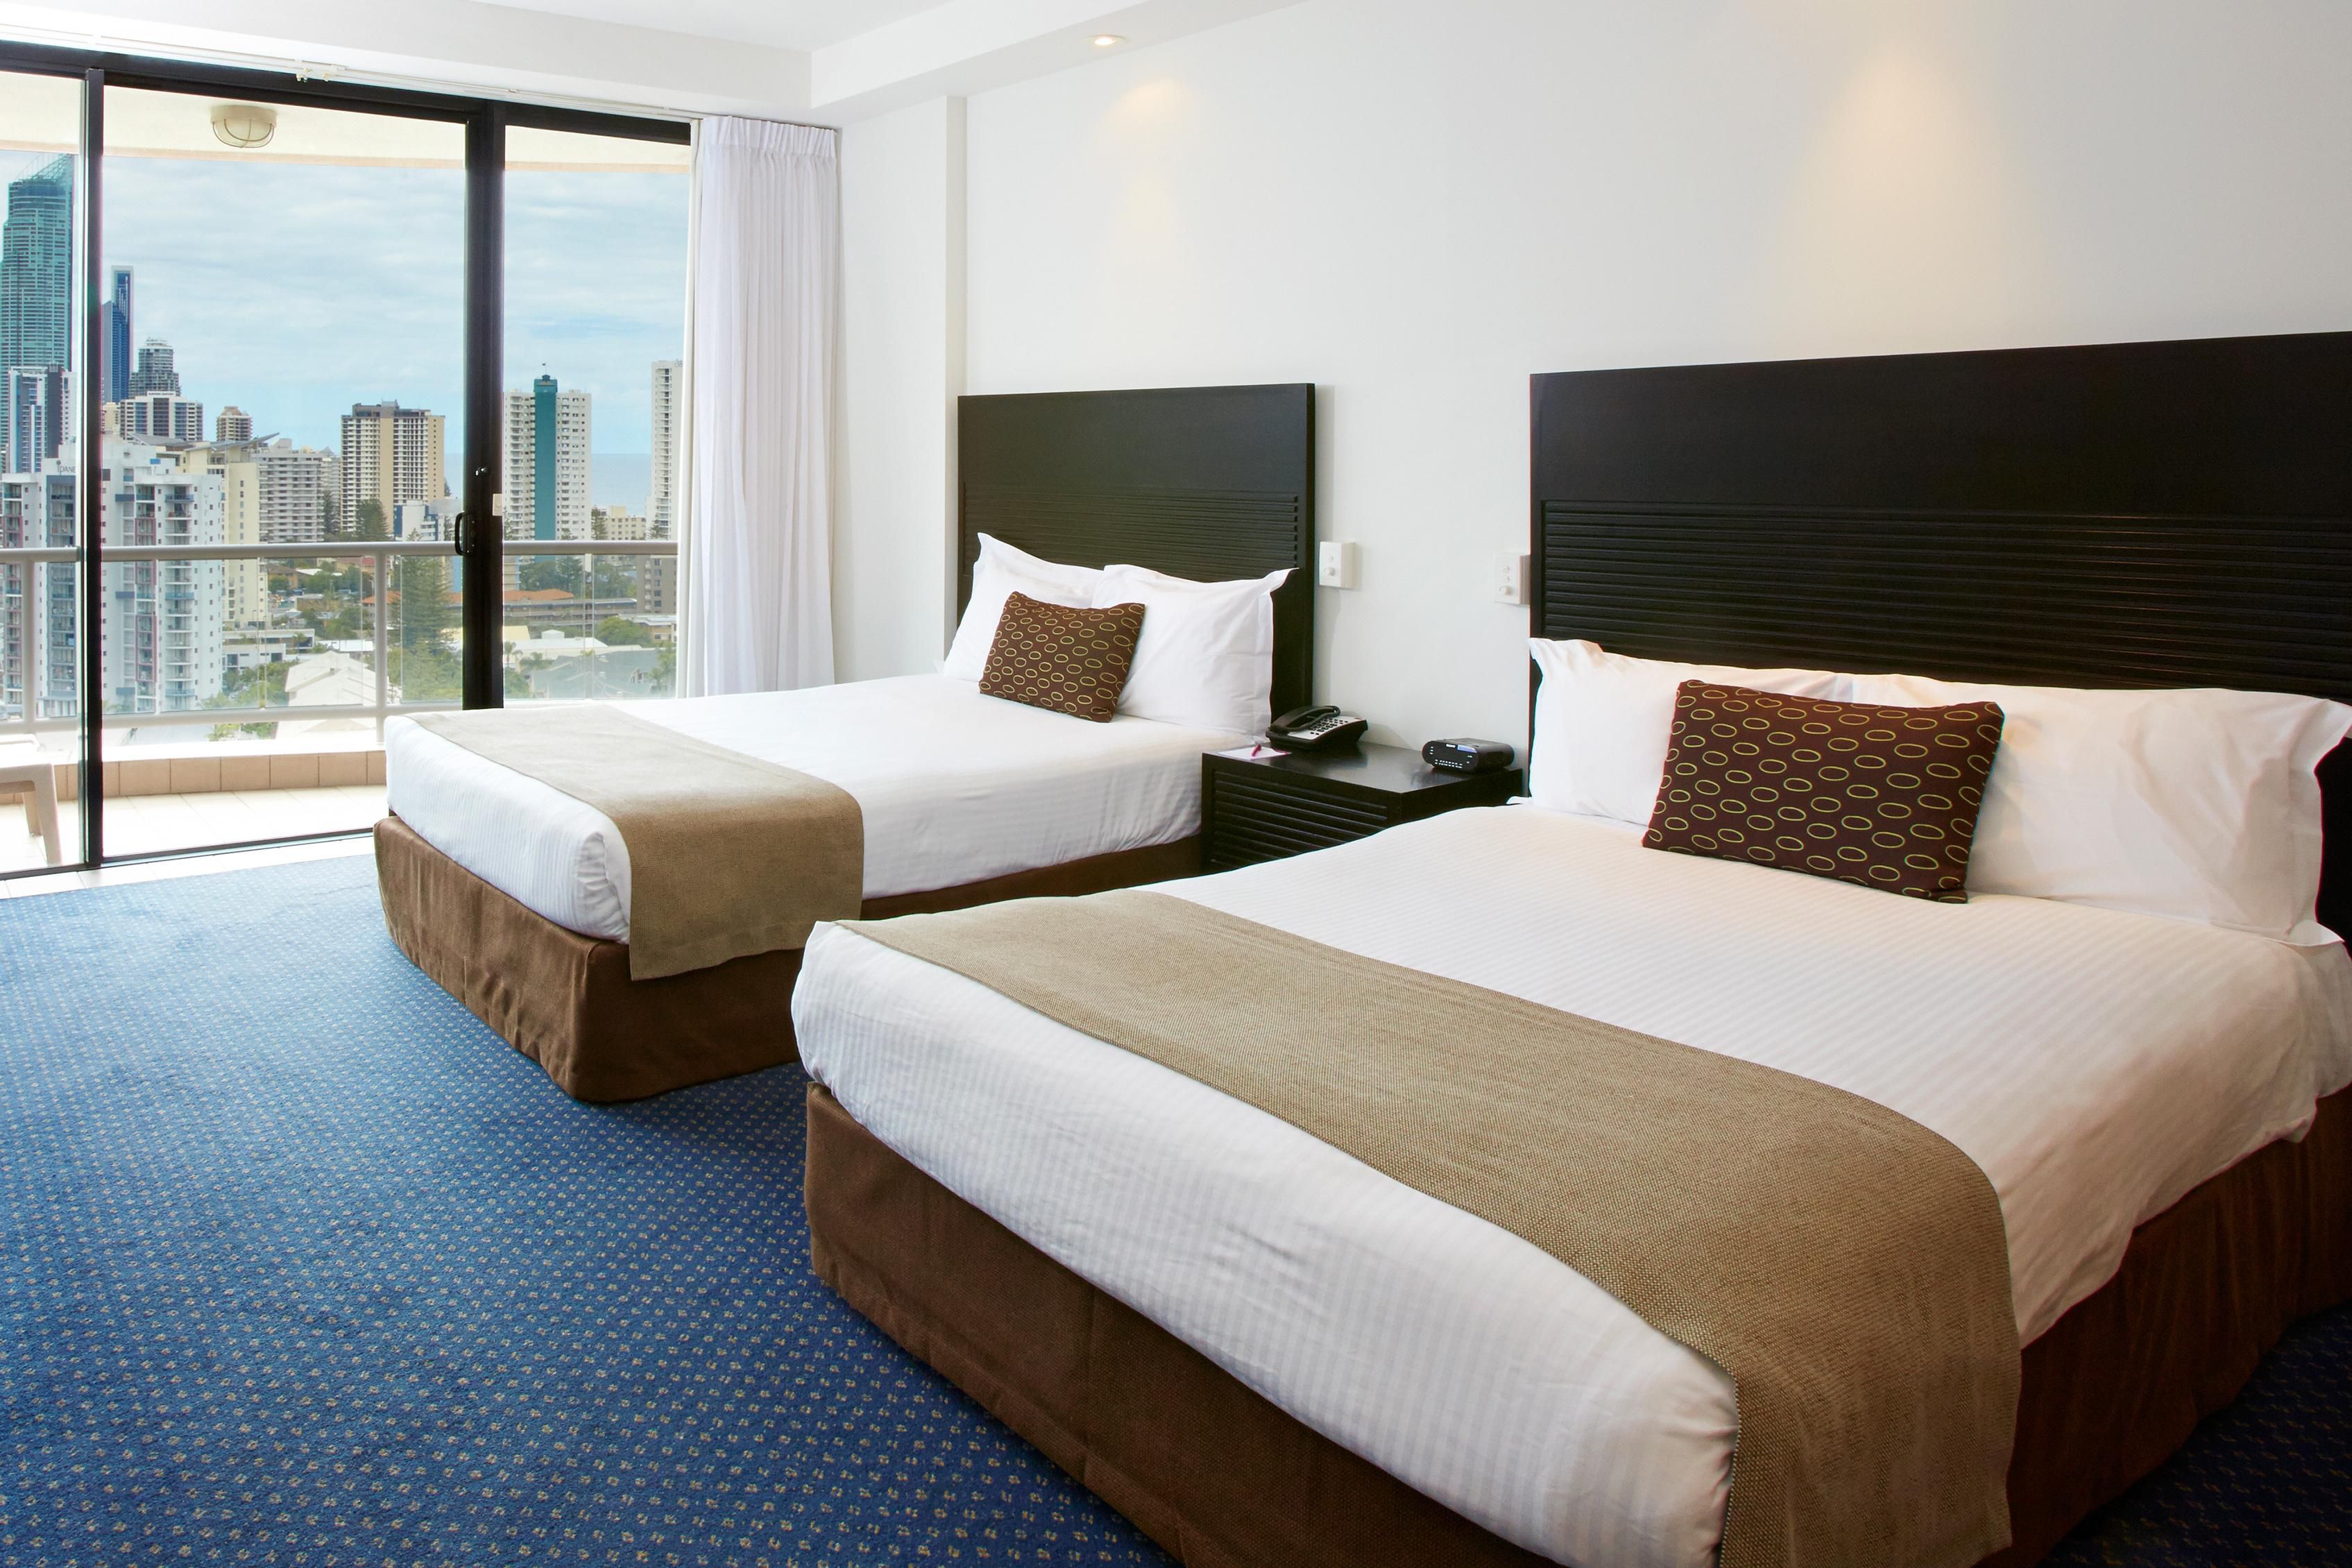 Rooms with views of Surfers Paradise and the coastline